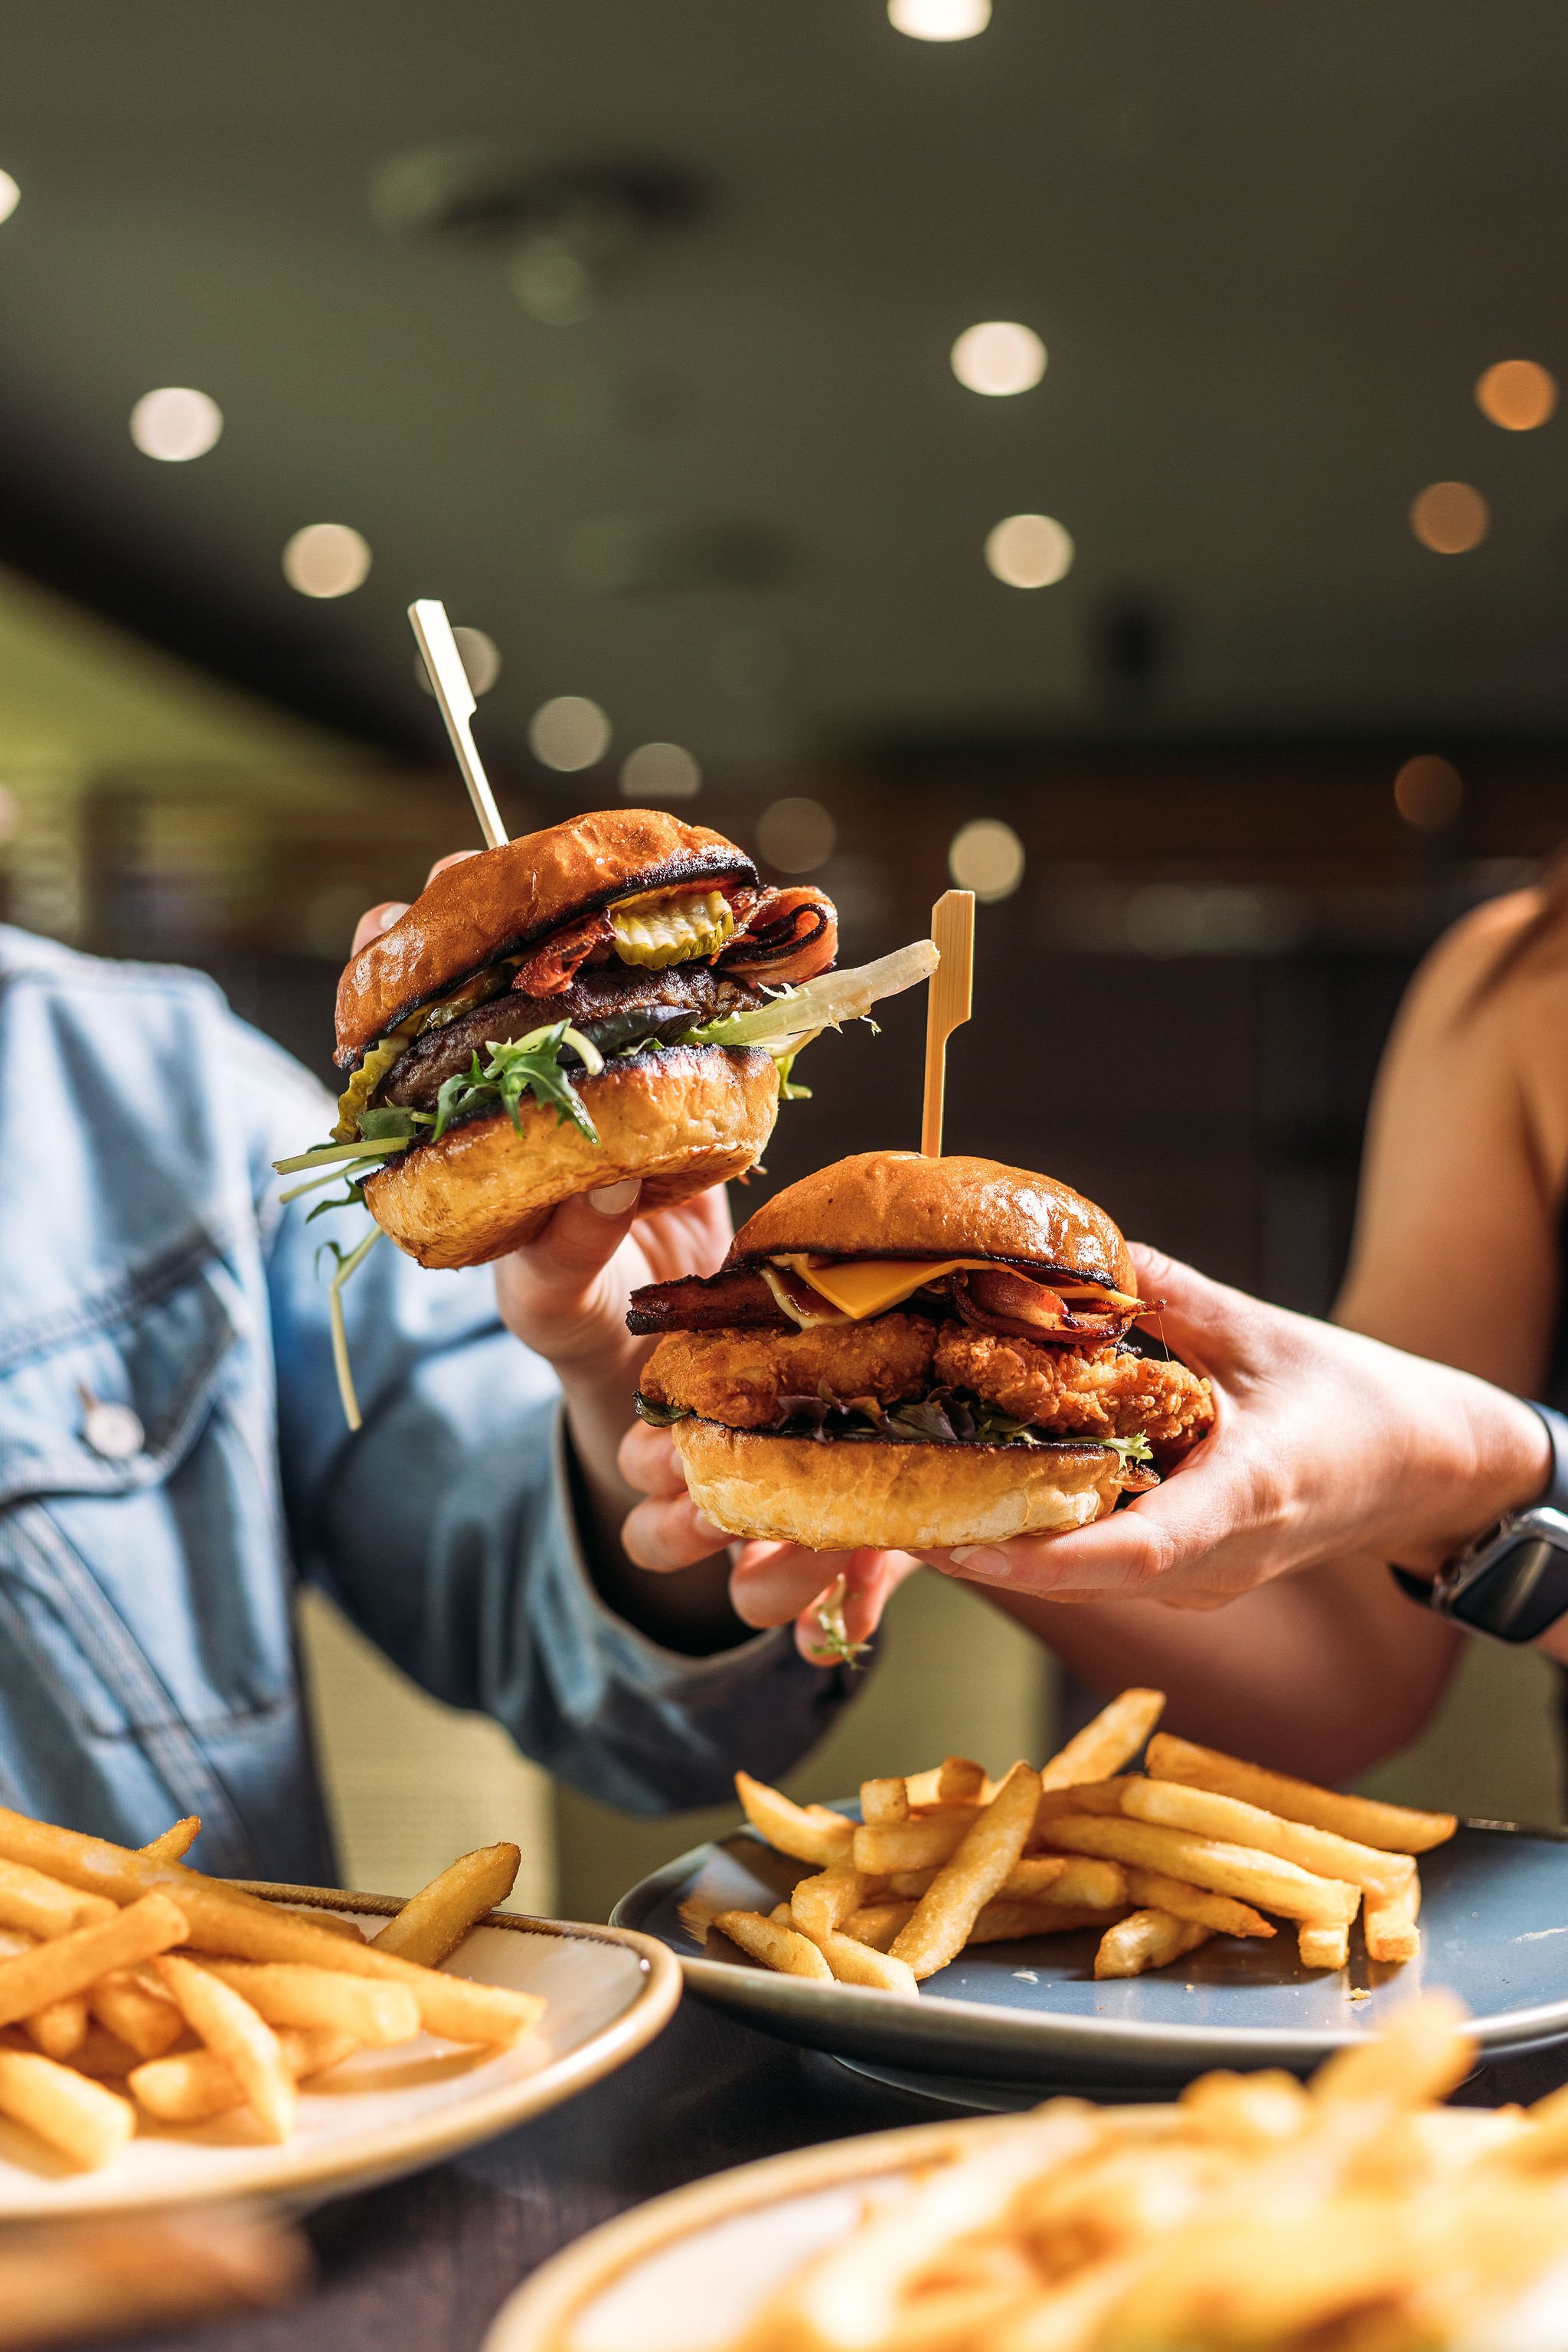 Canberra food photographer - hands hold burgers